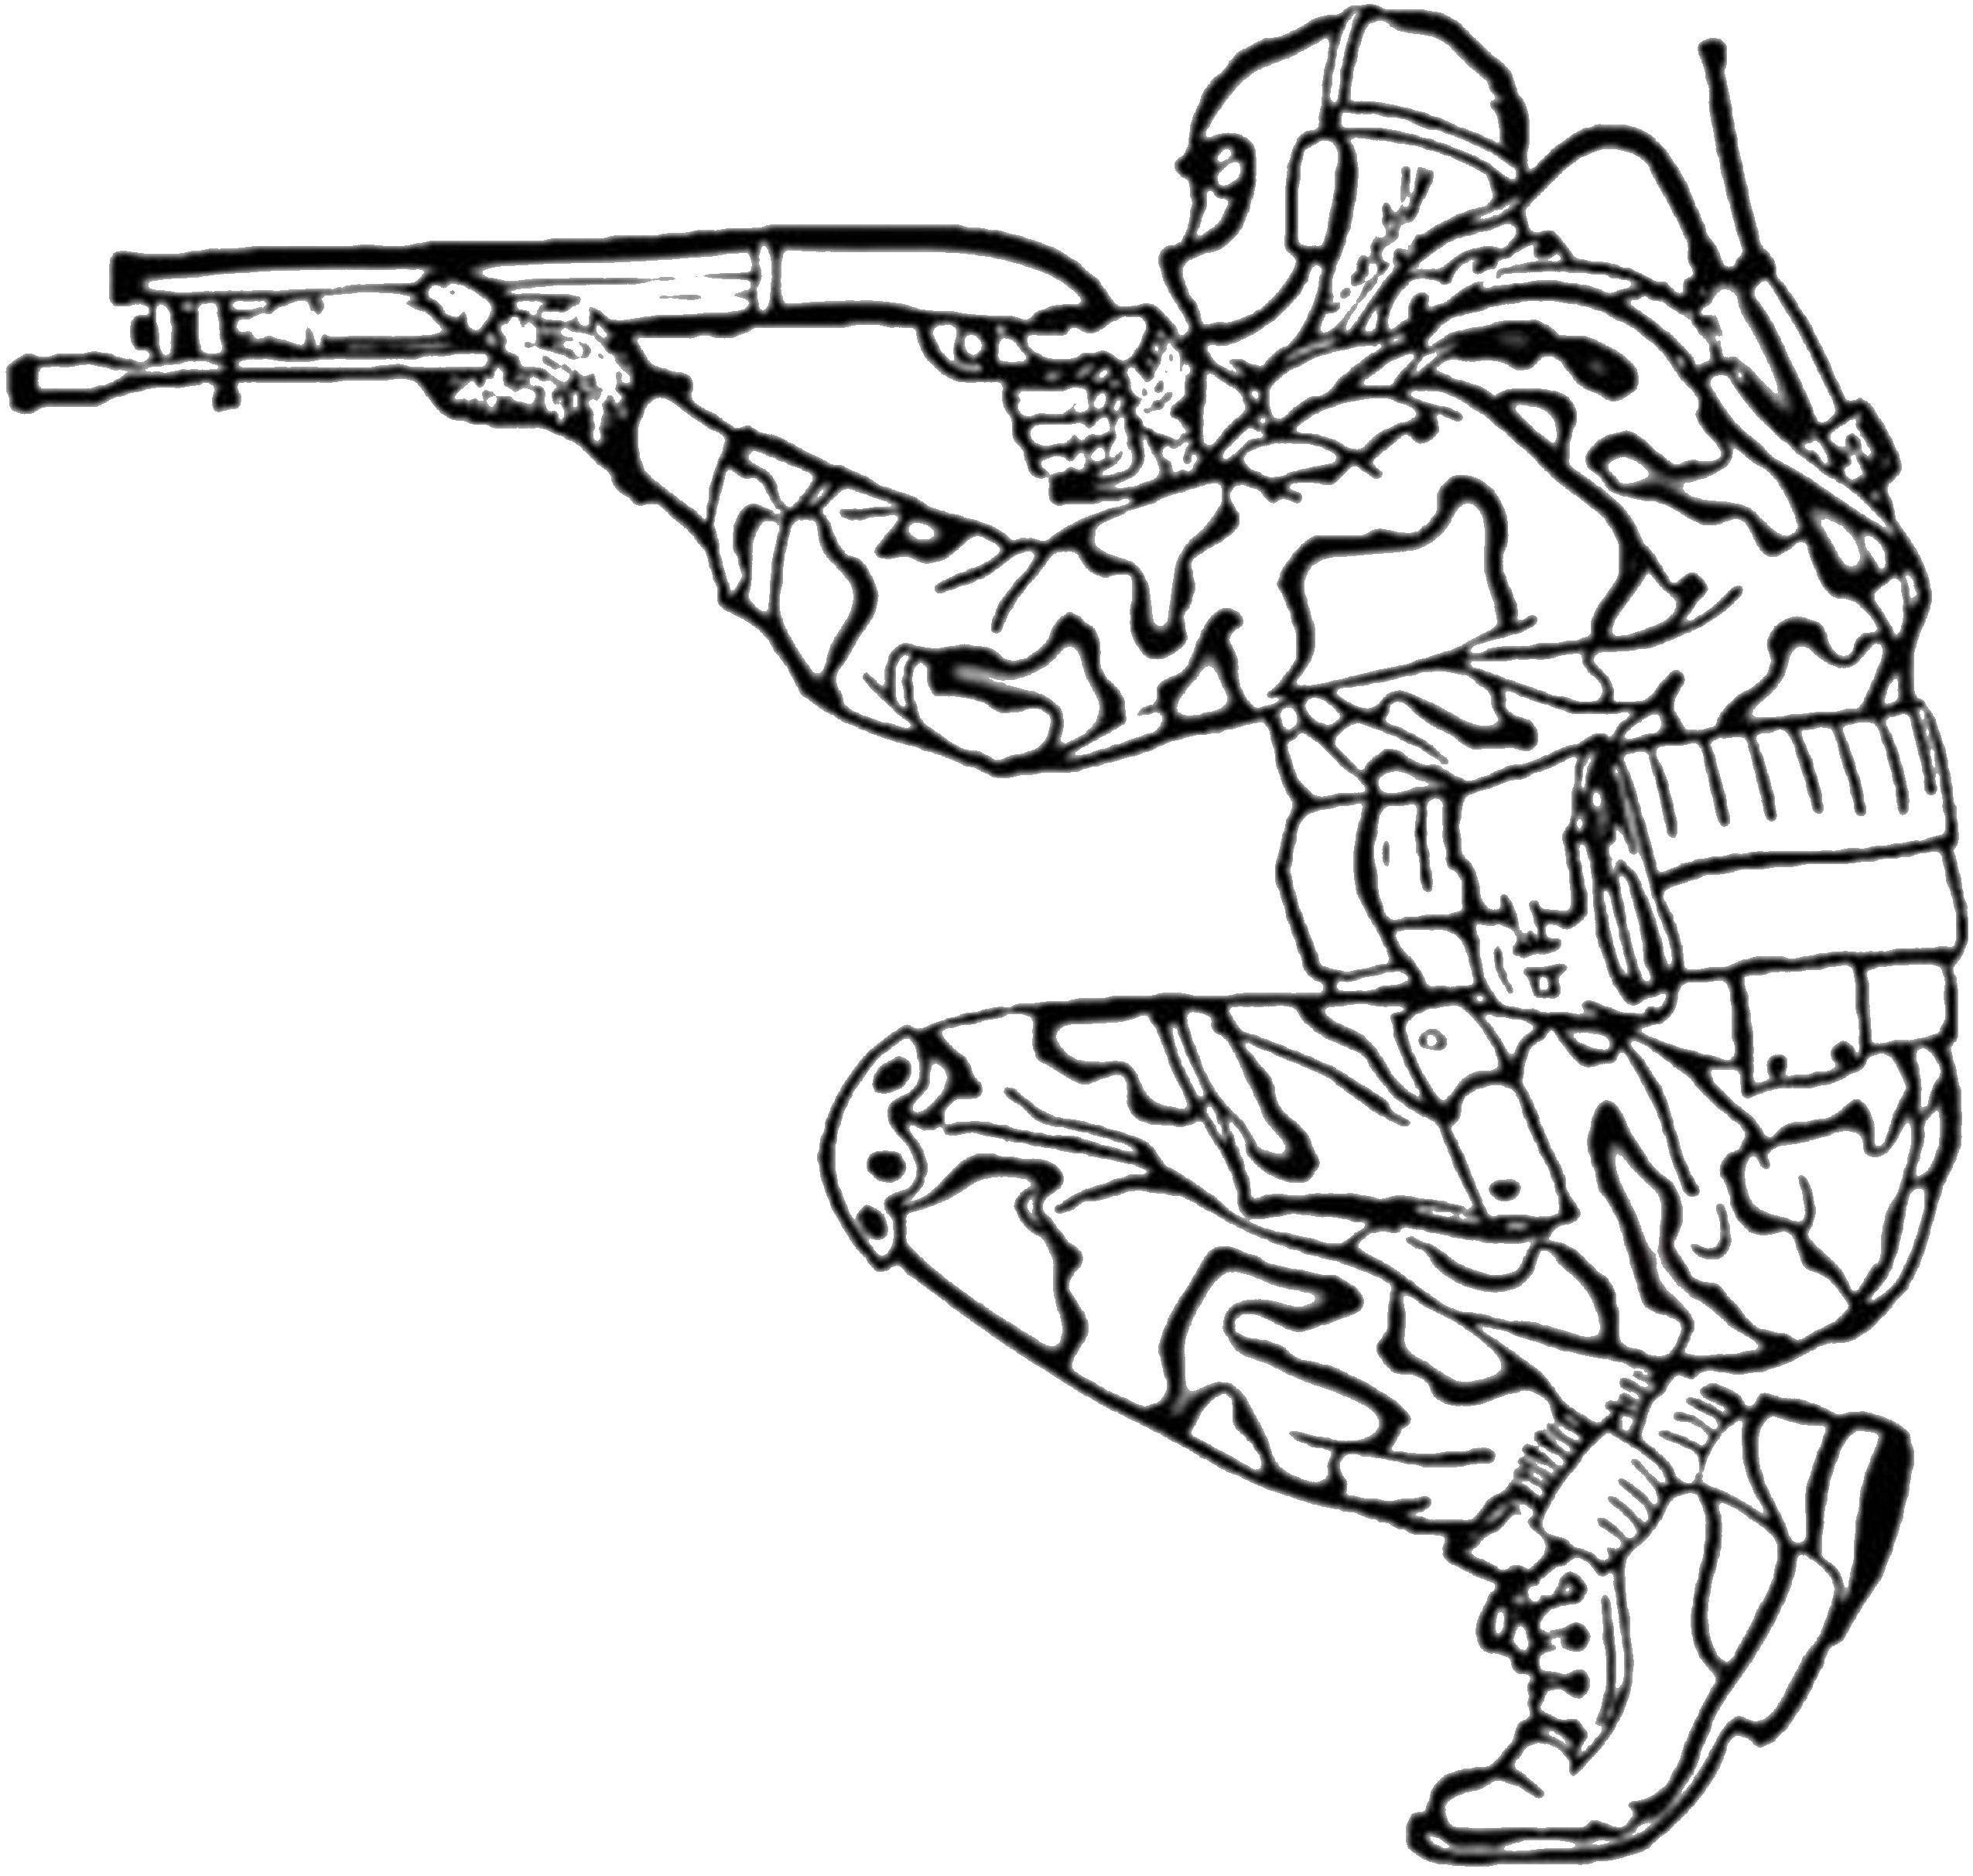 Coloring Sniper. Category military. Tags:  sniper, military.